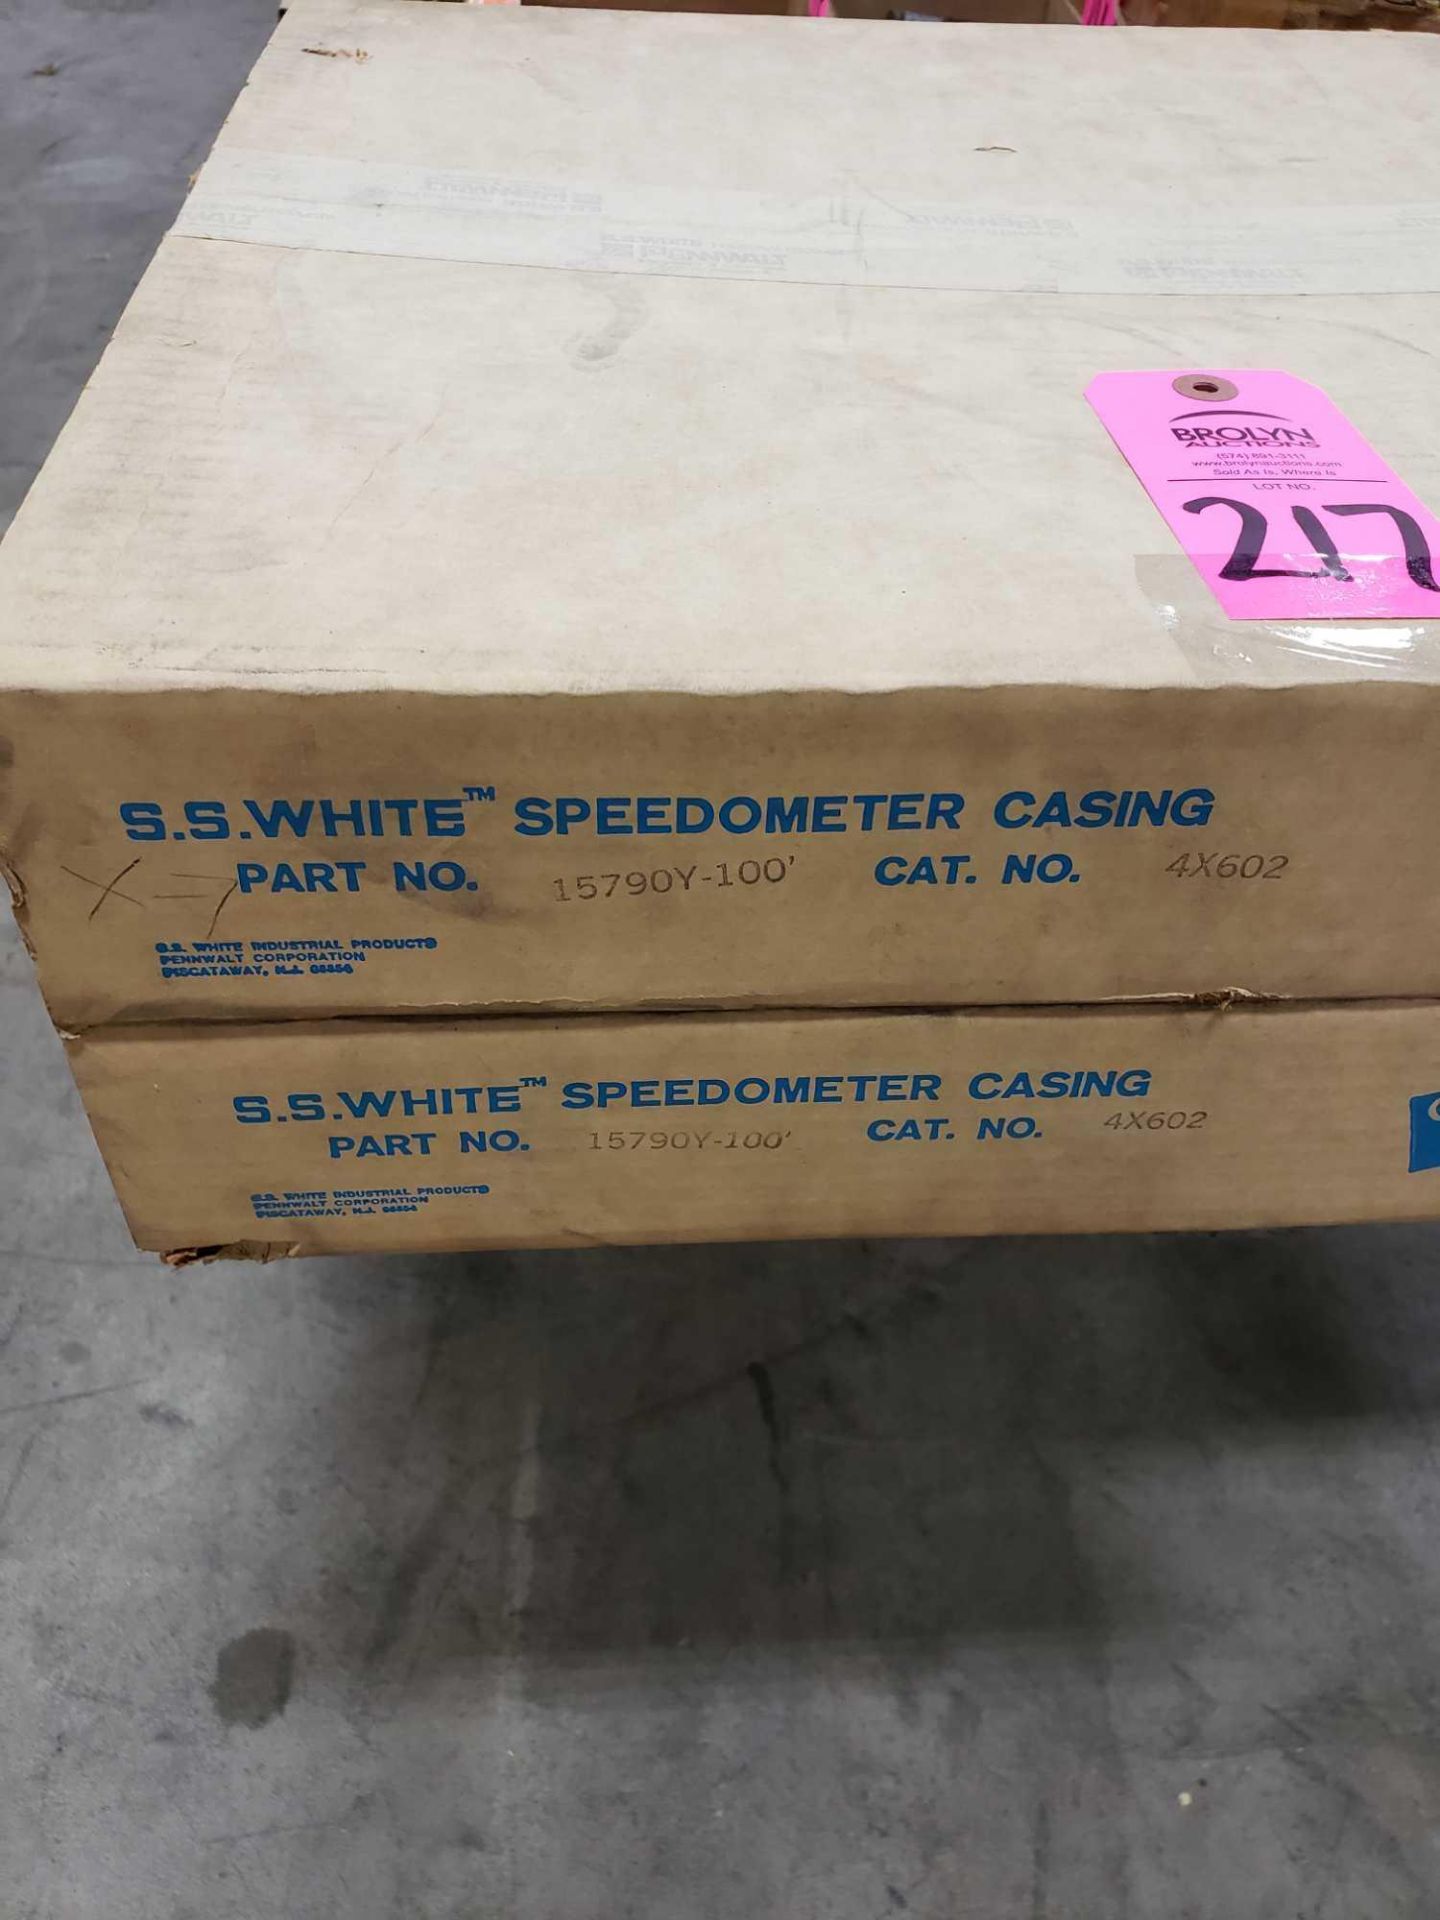 Qty 2 - S.S. White speedometer casing part number 15790Y-100, catalog 4X602. New in box. - Image 2 of 3